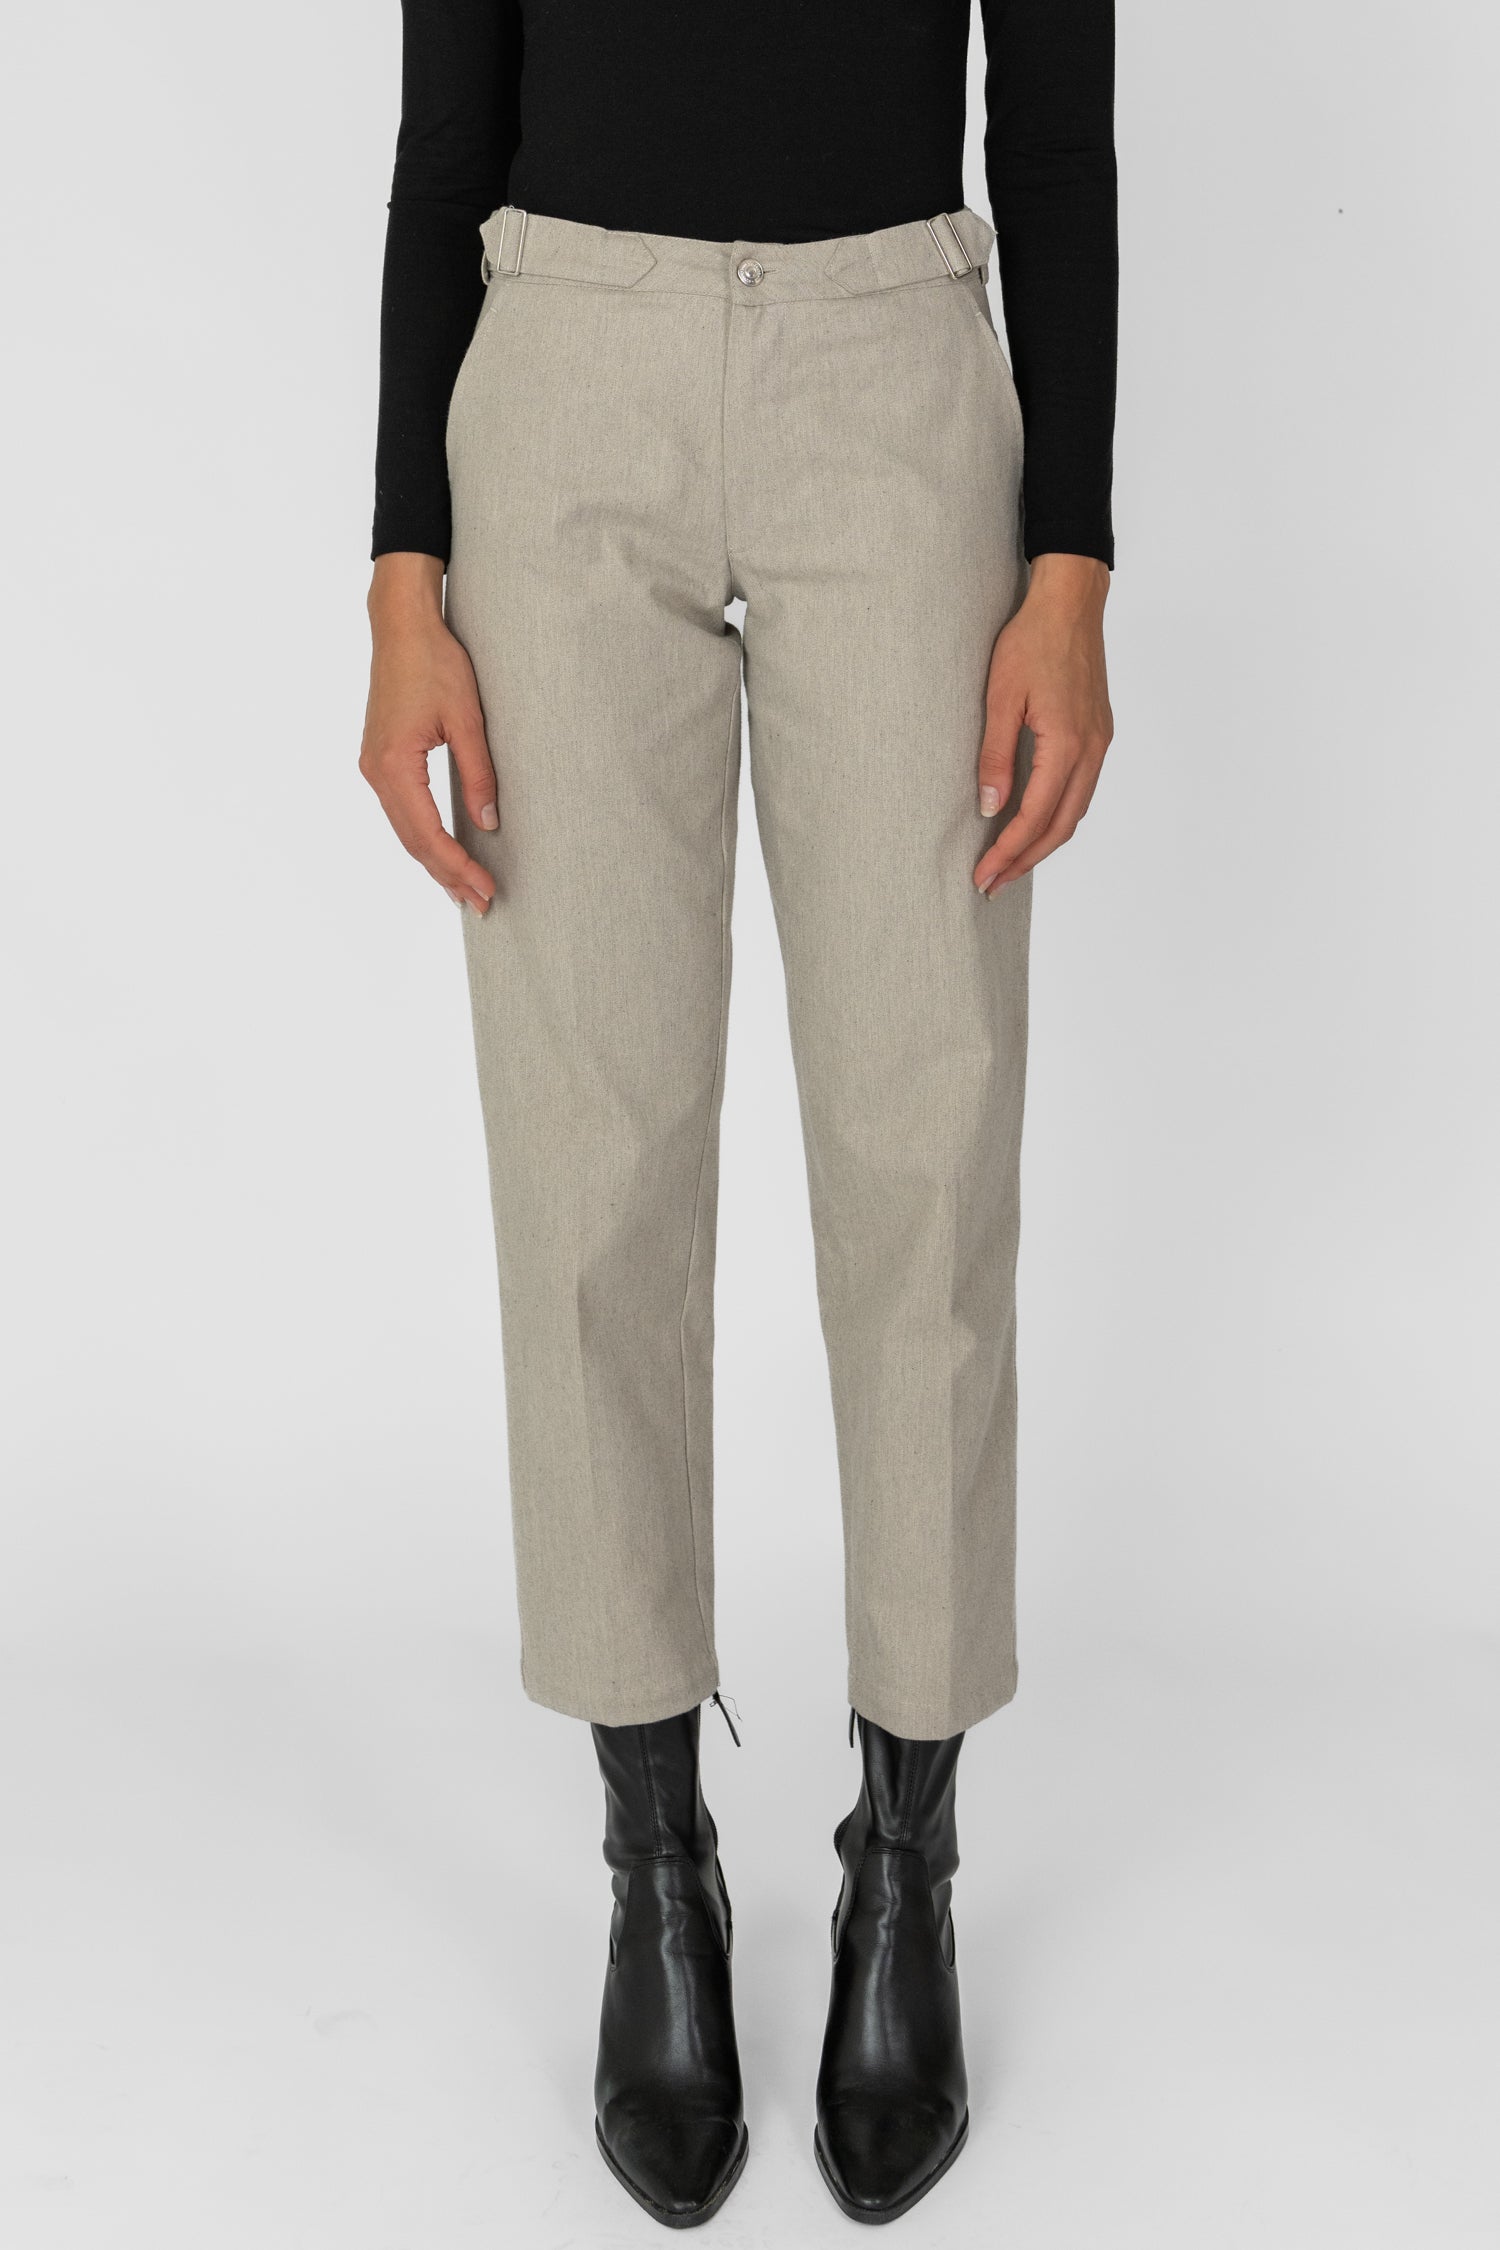 Story of Mine Slim-Fit Trousers Beige